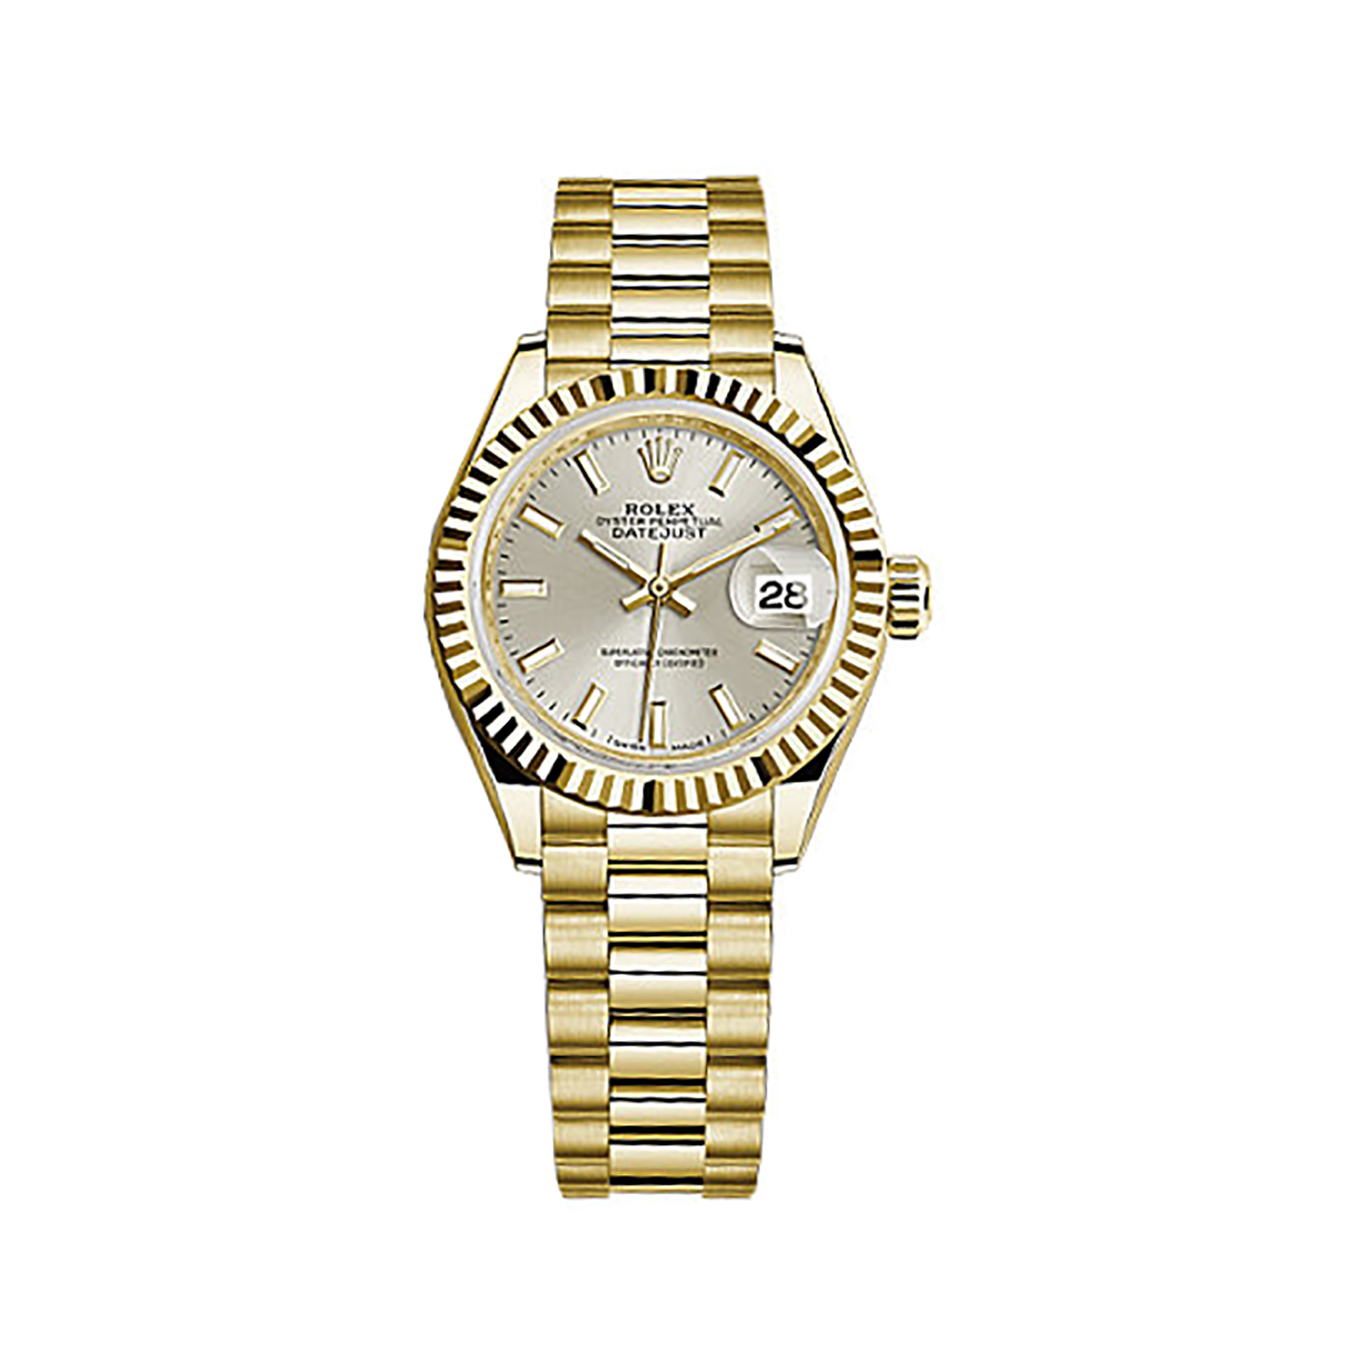 Lady-Datejust 28 279178 Gold Watch (Silver)